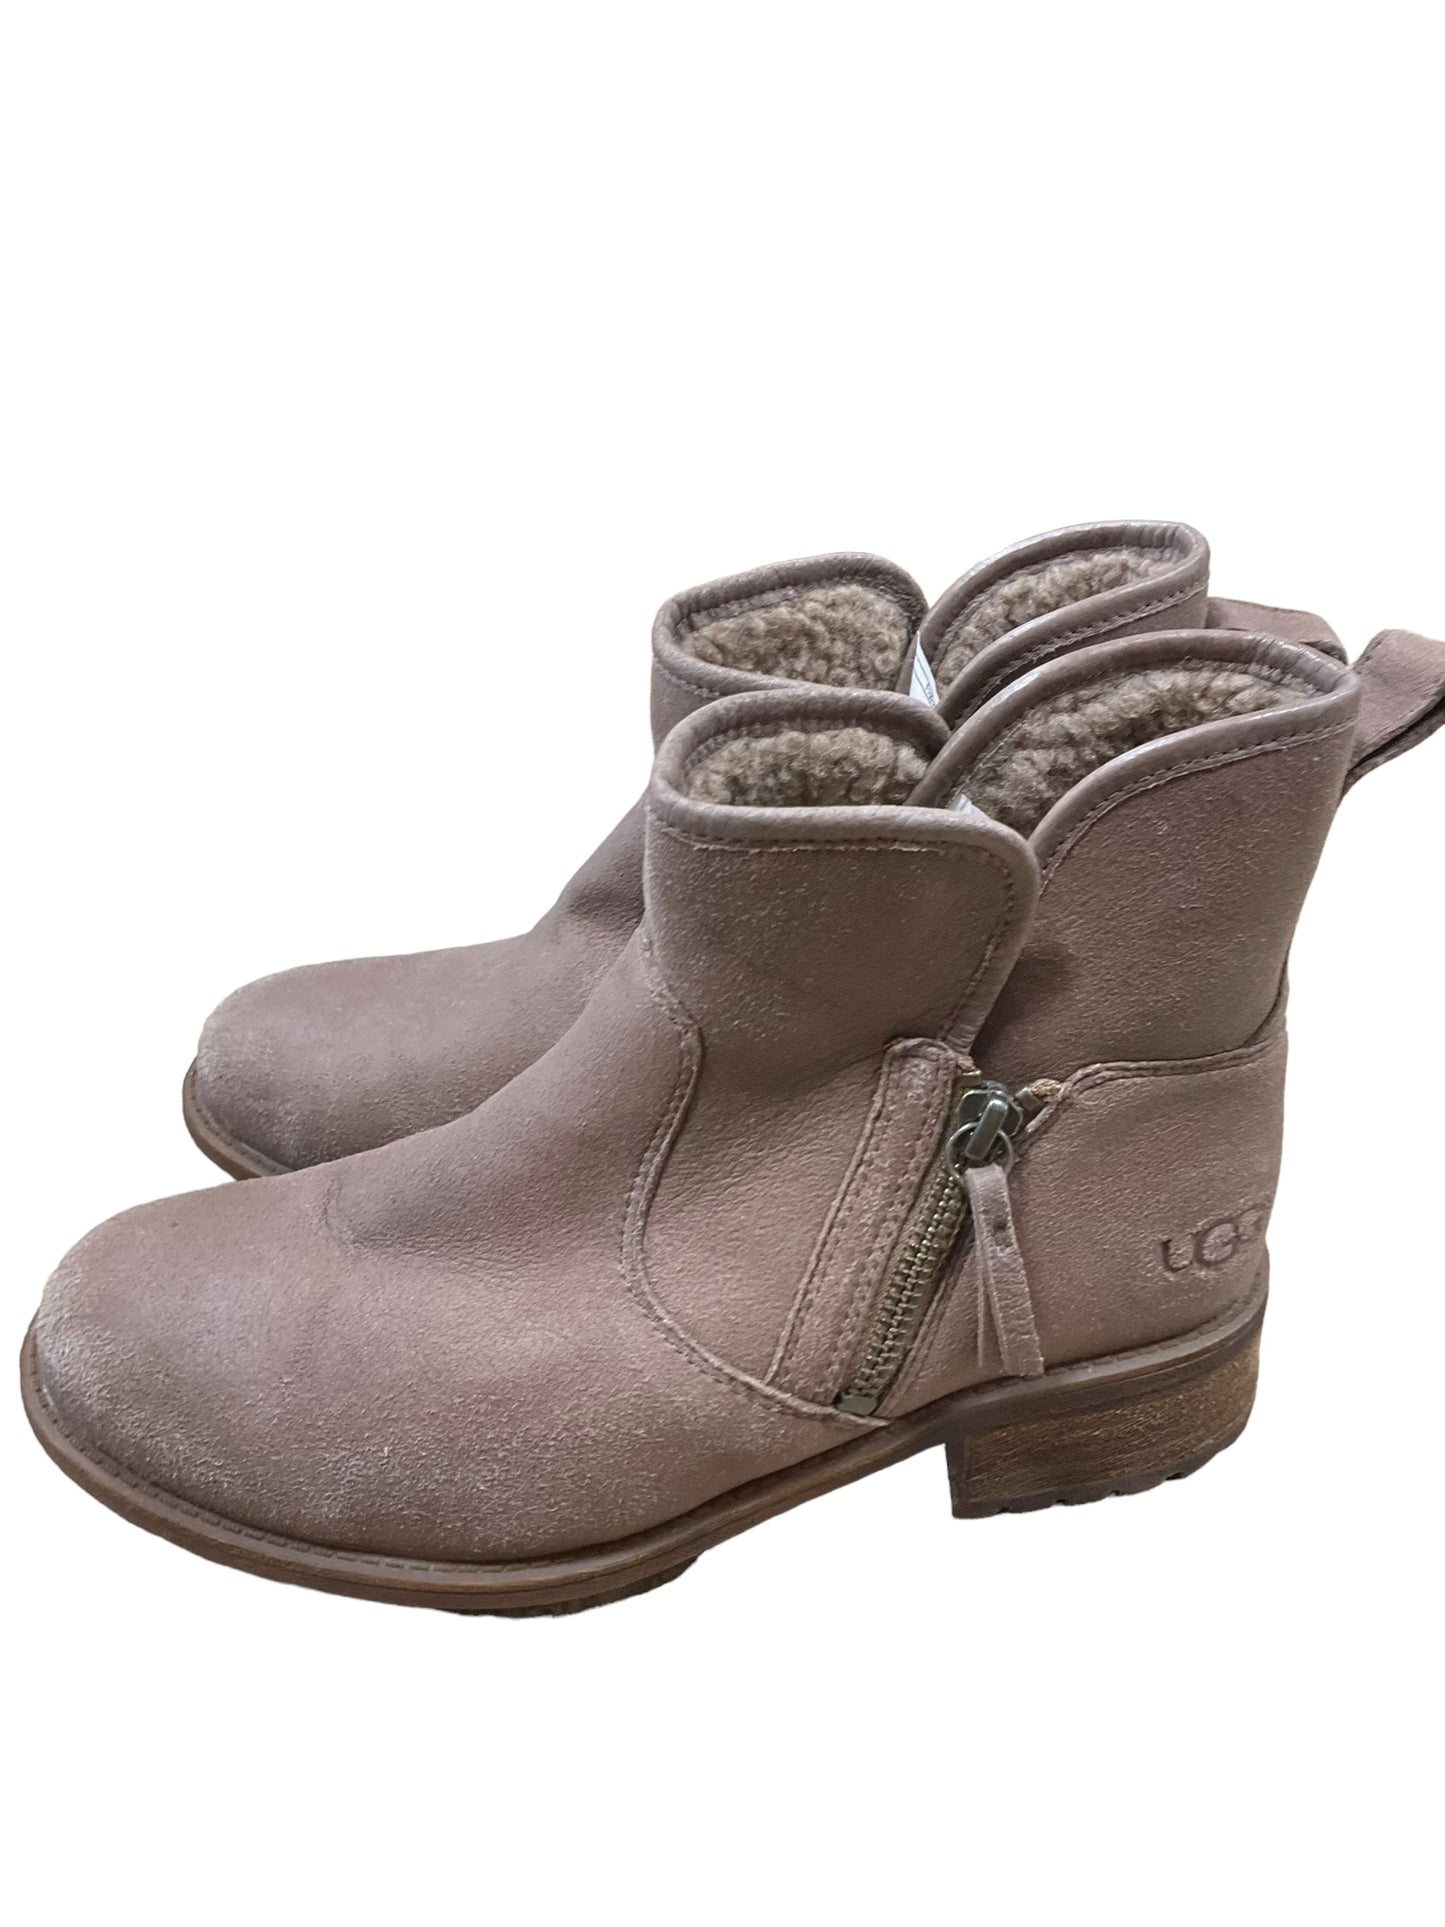 Boots Ankle Heels By Ugg  Size: 7